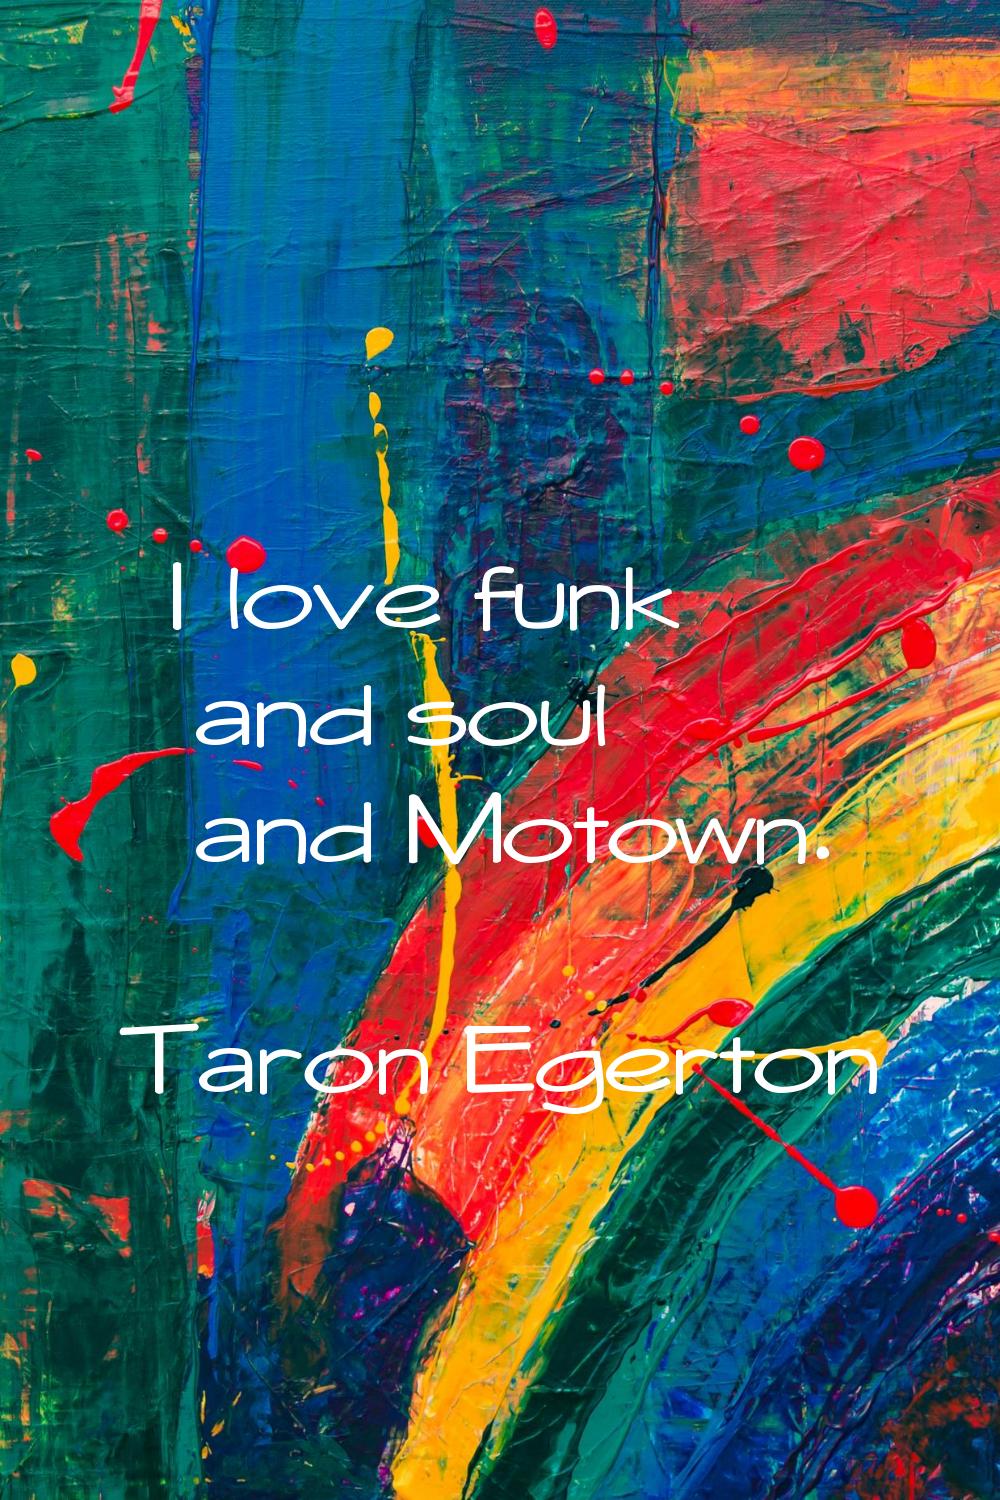 I love funk and soul and Motown.